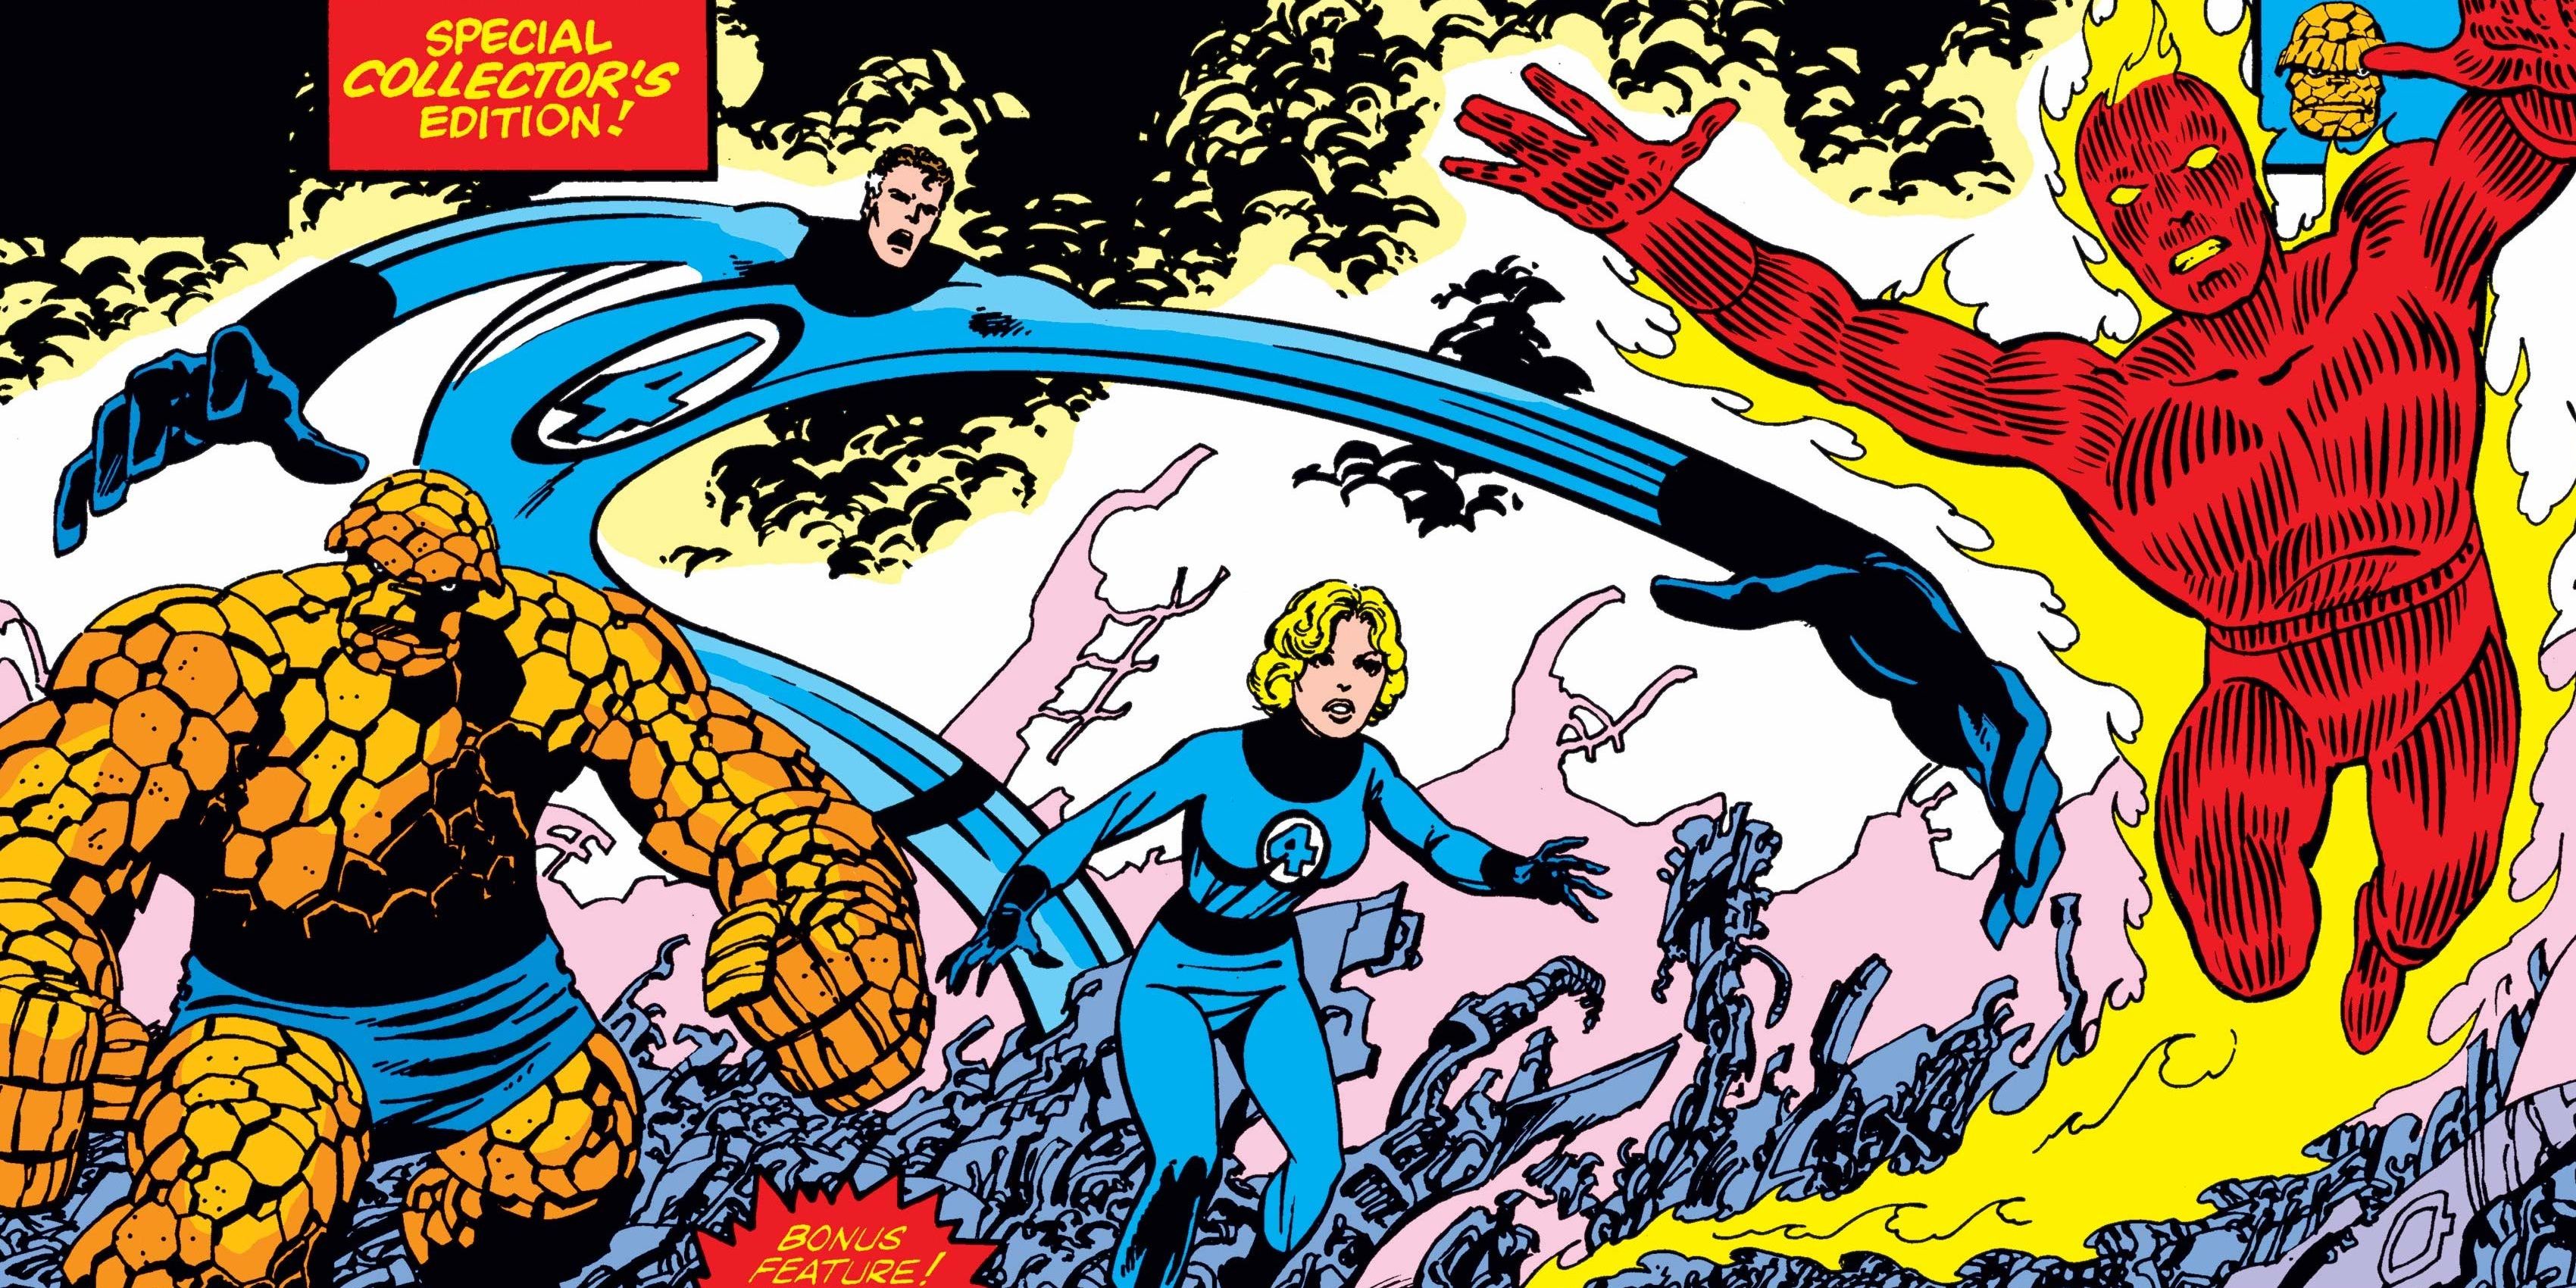 The Fantastic Four in a Marvel comic book